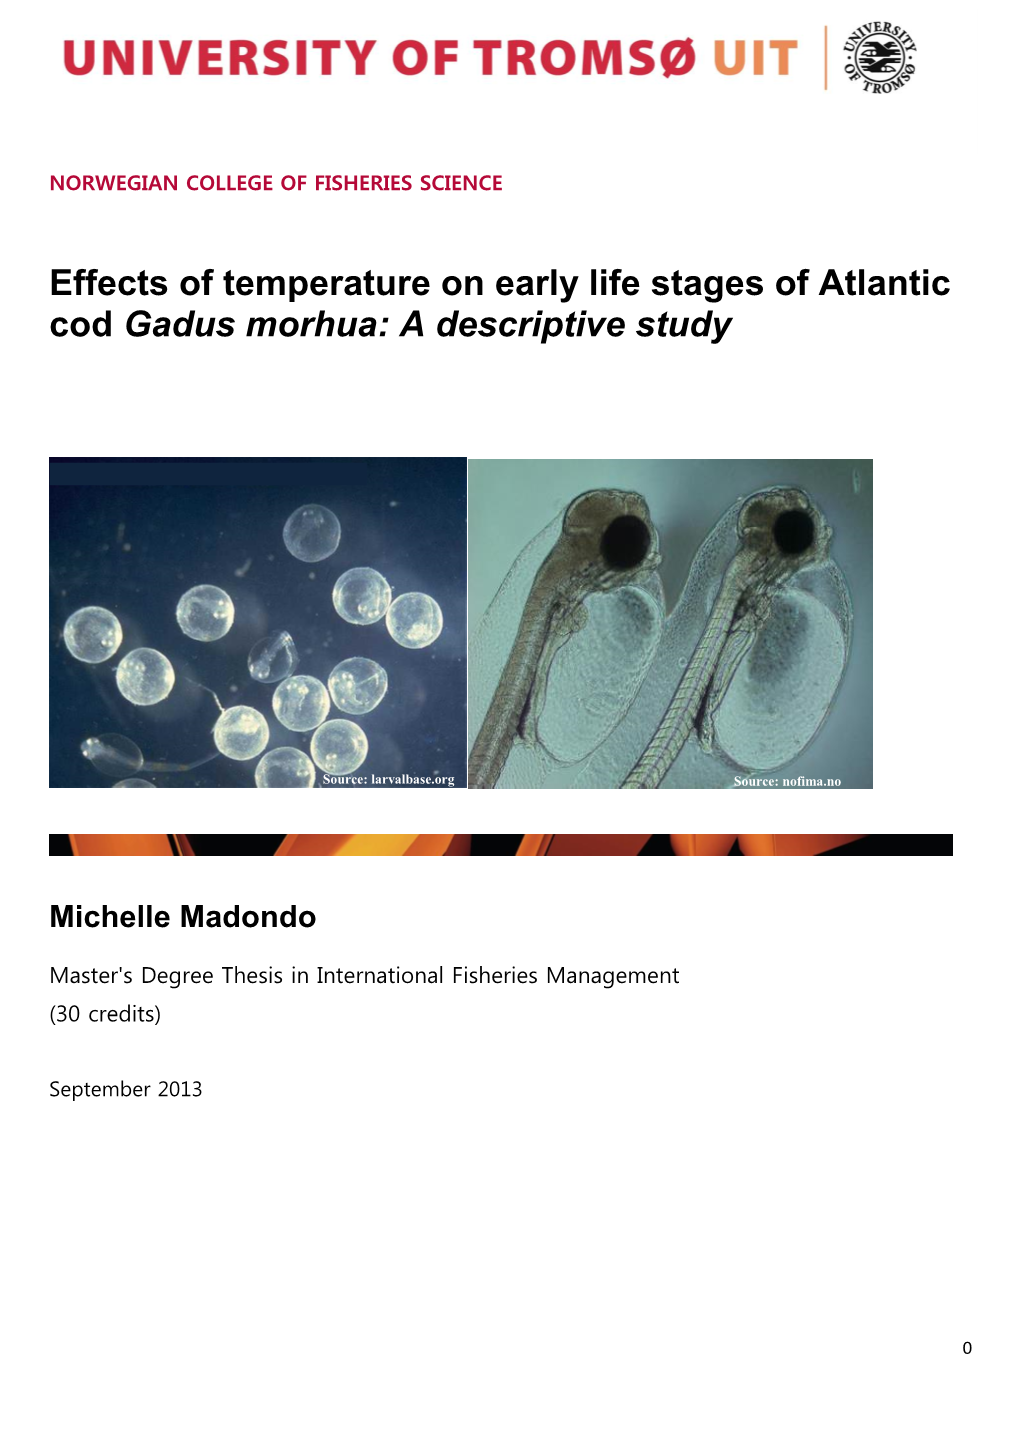 Effects of Temperature on Early Life Stages of Atlantic Cod, Gadus Morhua: a Descriptive Study